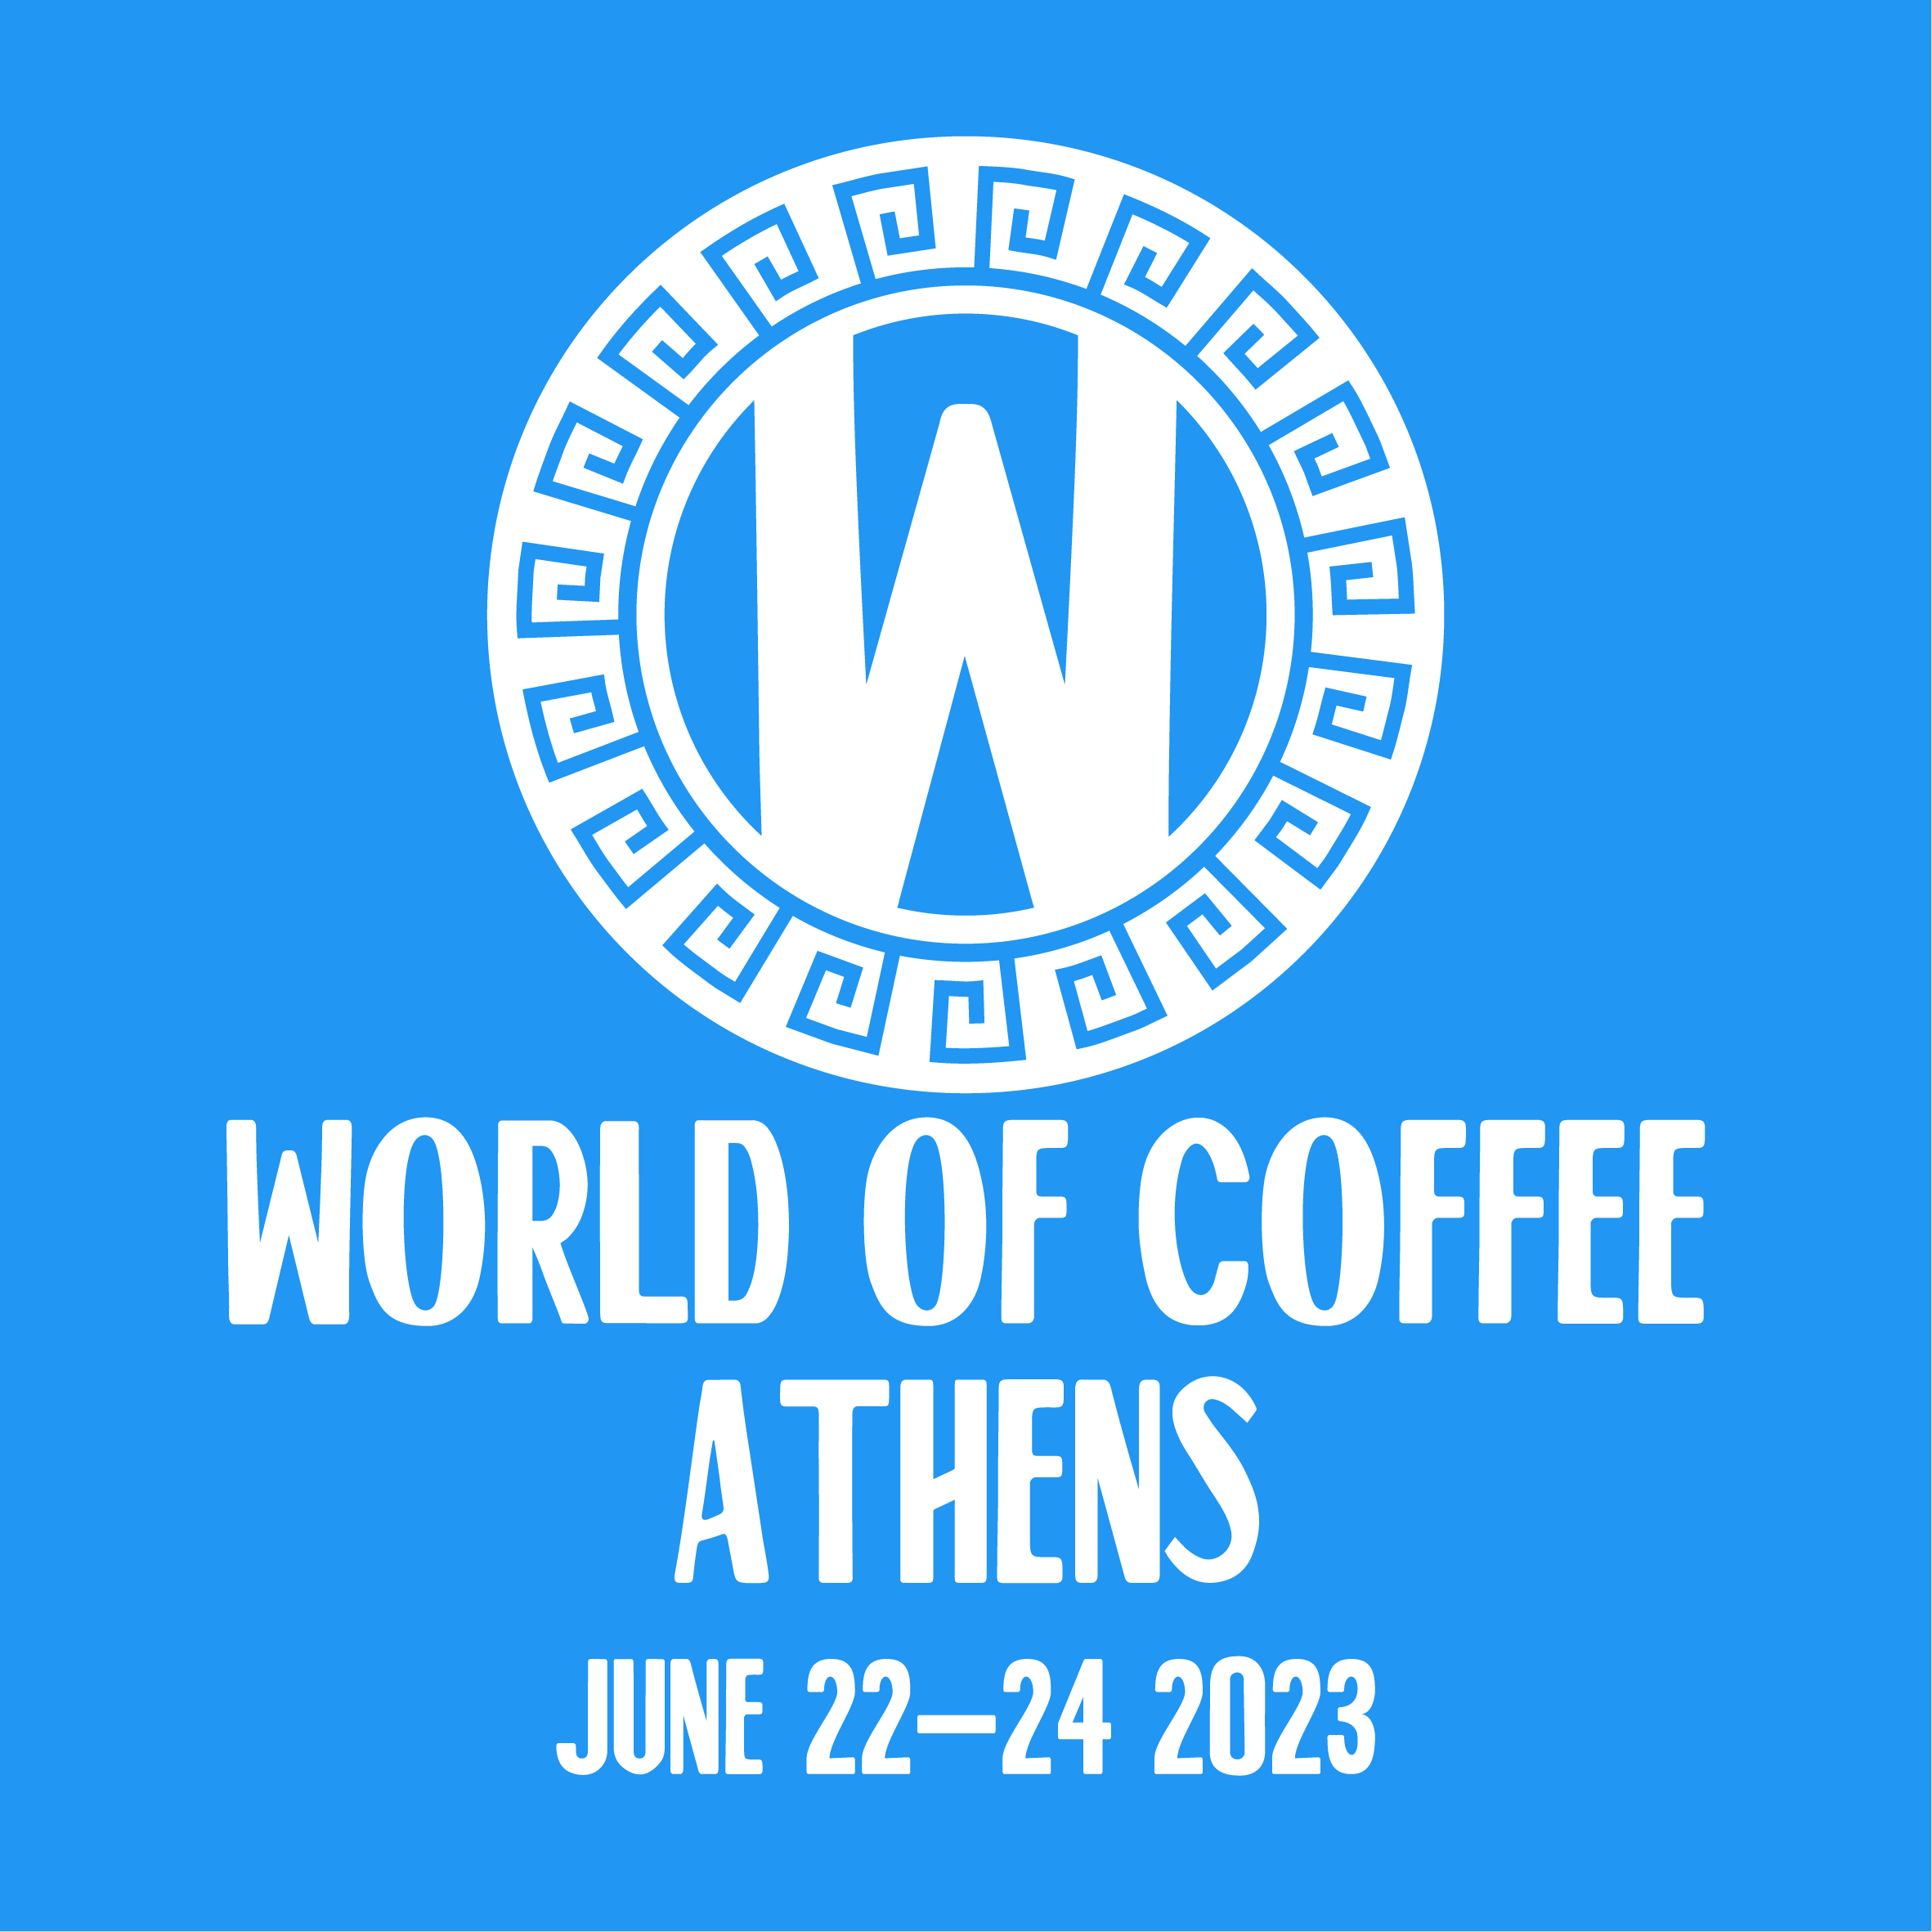 Welcome to World of Coffee 2023